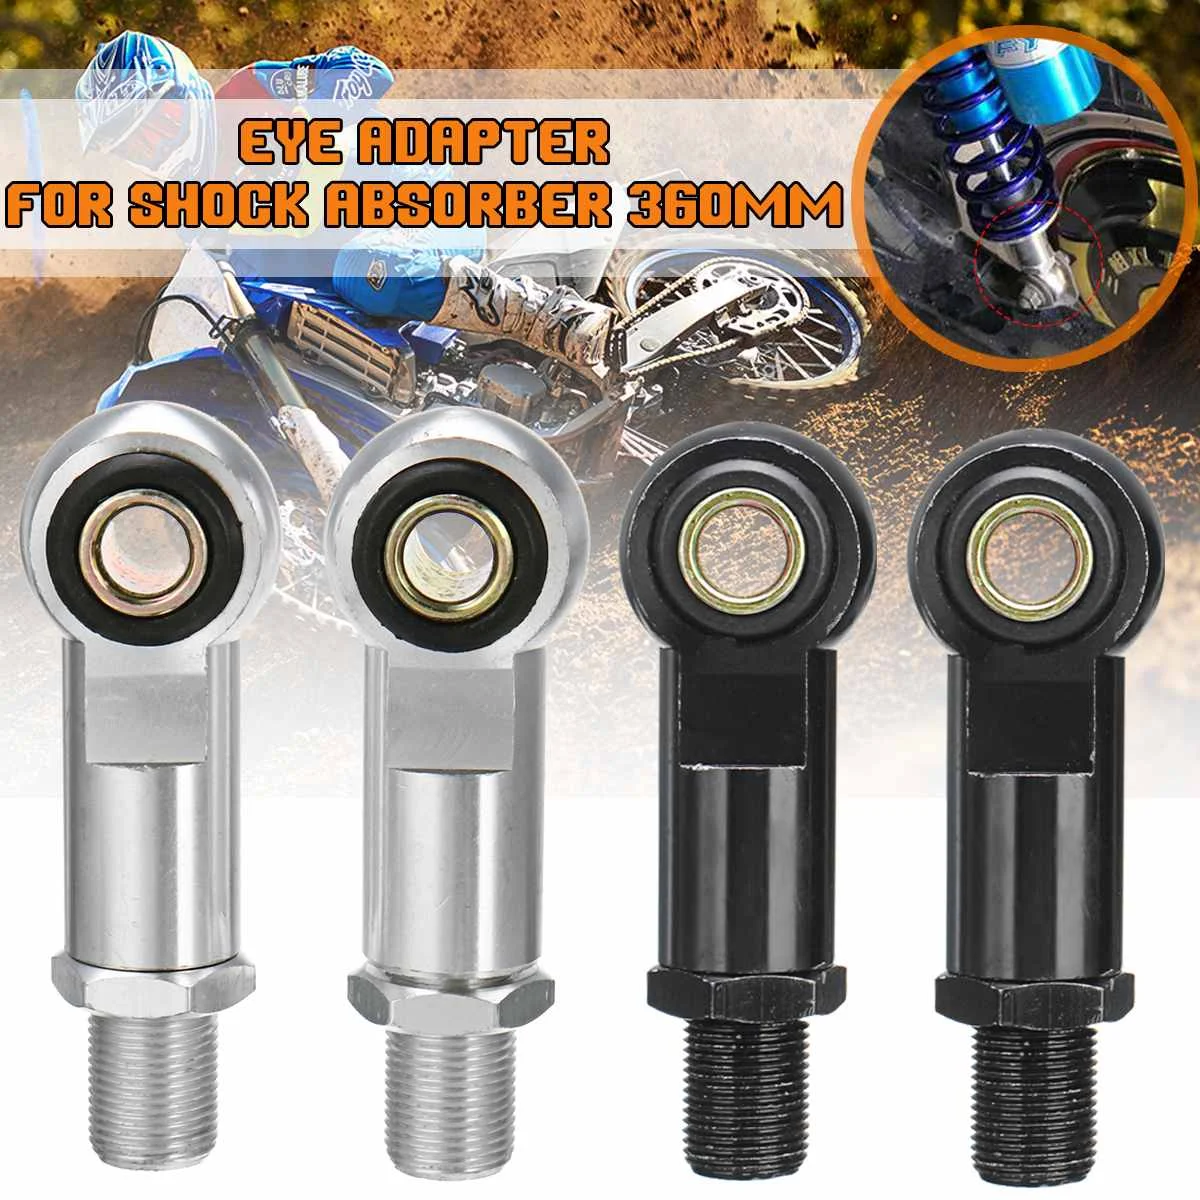 1 Pair 10mm Eye Adapter Eye End For Motorcycle Scooter Shock Absorber Sliver